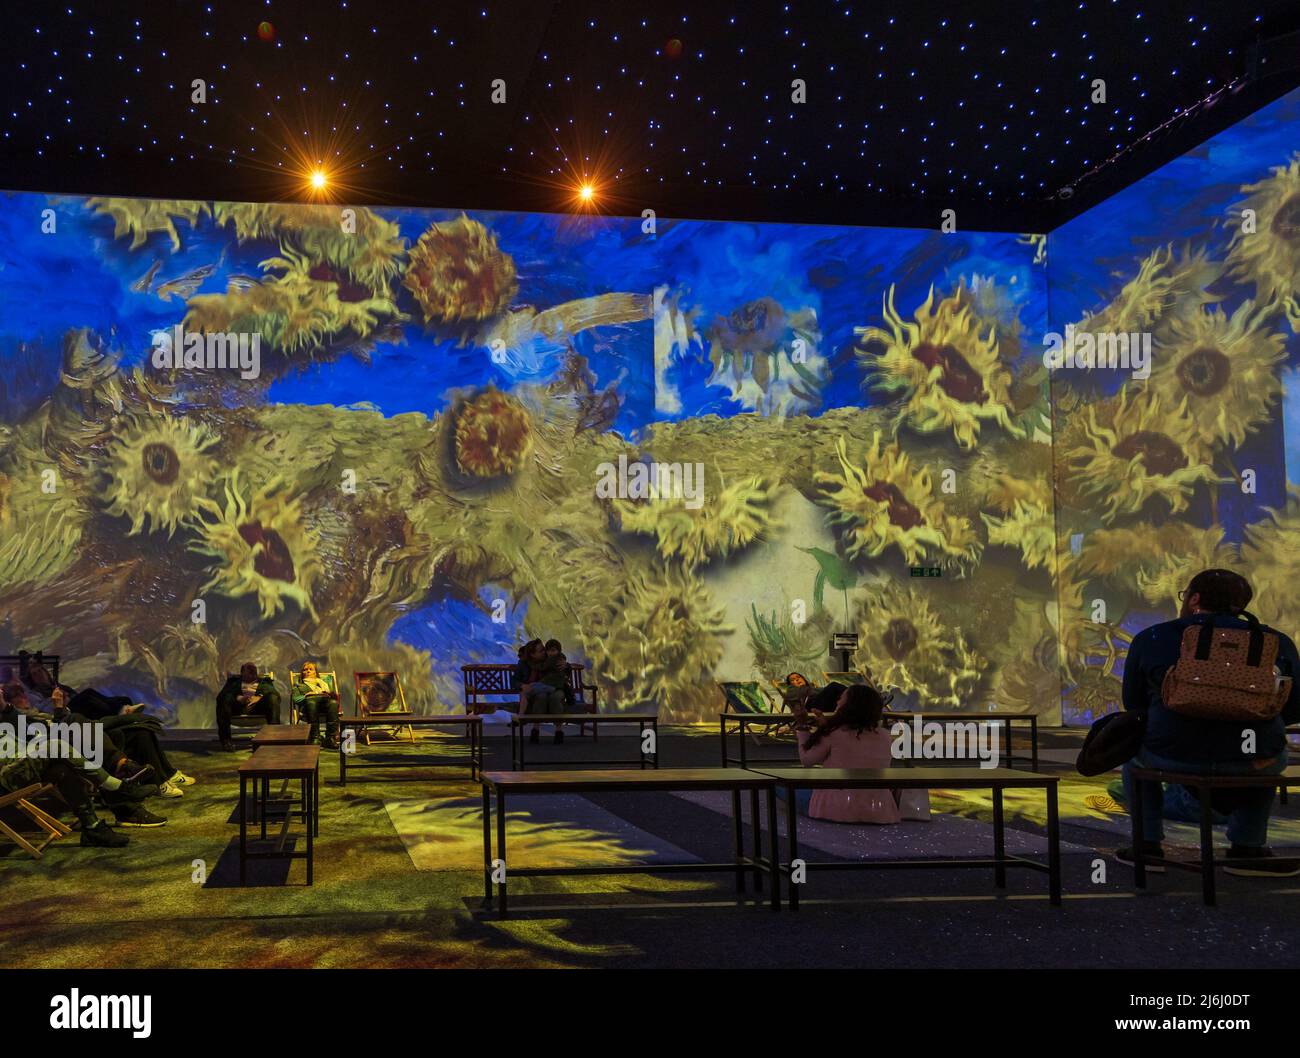 London, UK. 30 April 2022. Audience watching Sunflowers series at Van Gogh The Immersive Experience featuring illustrated light and sound stories. Stock Photo